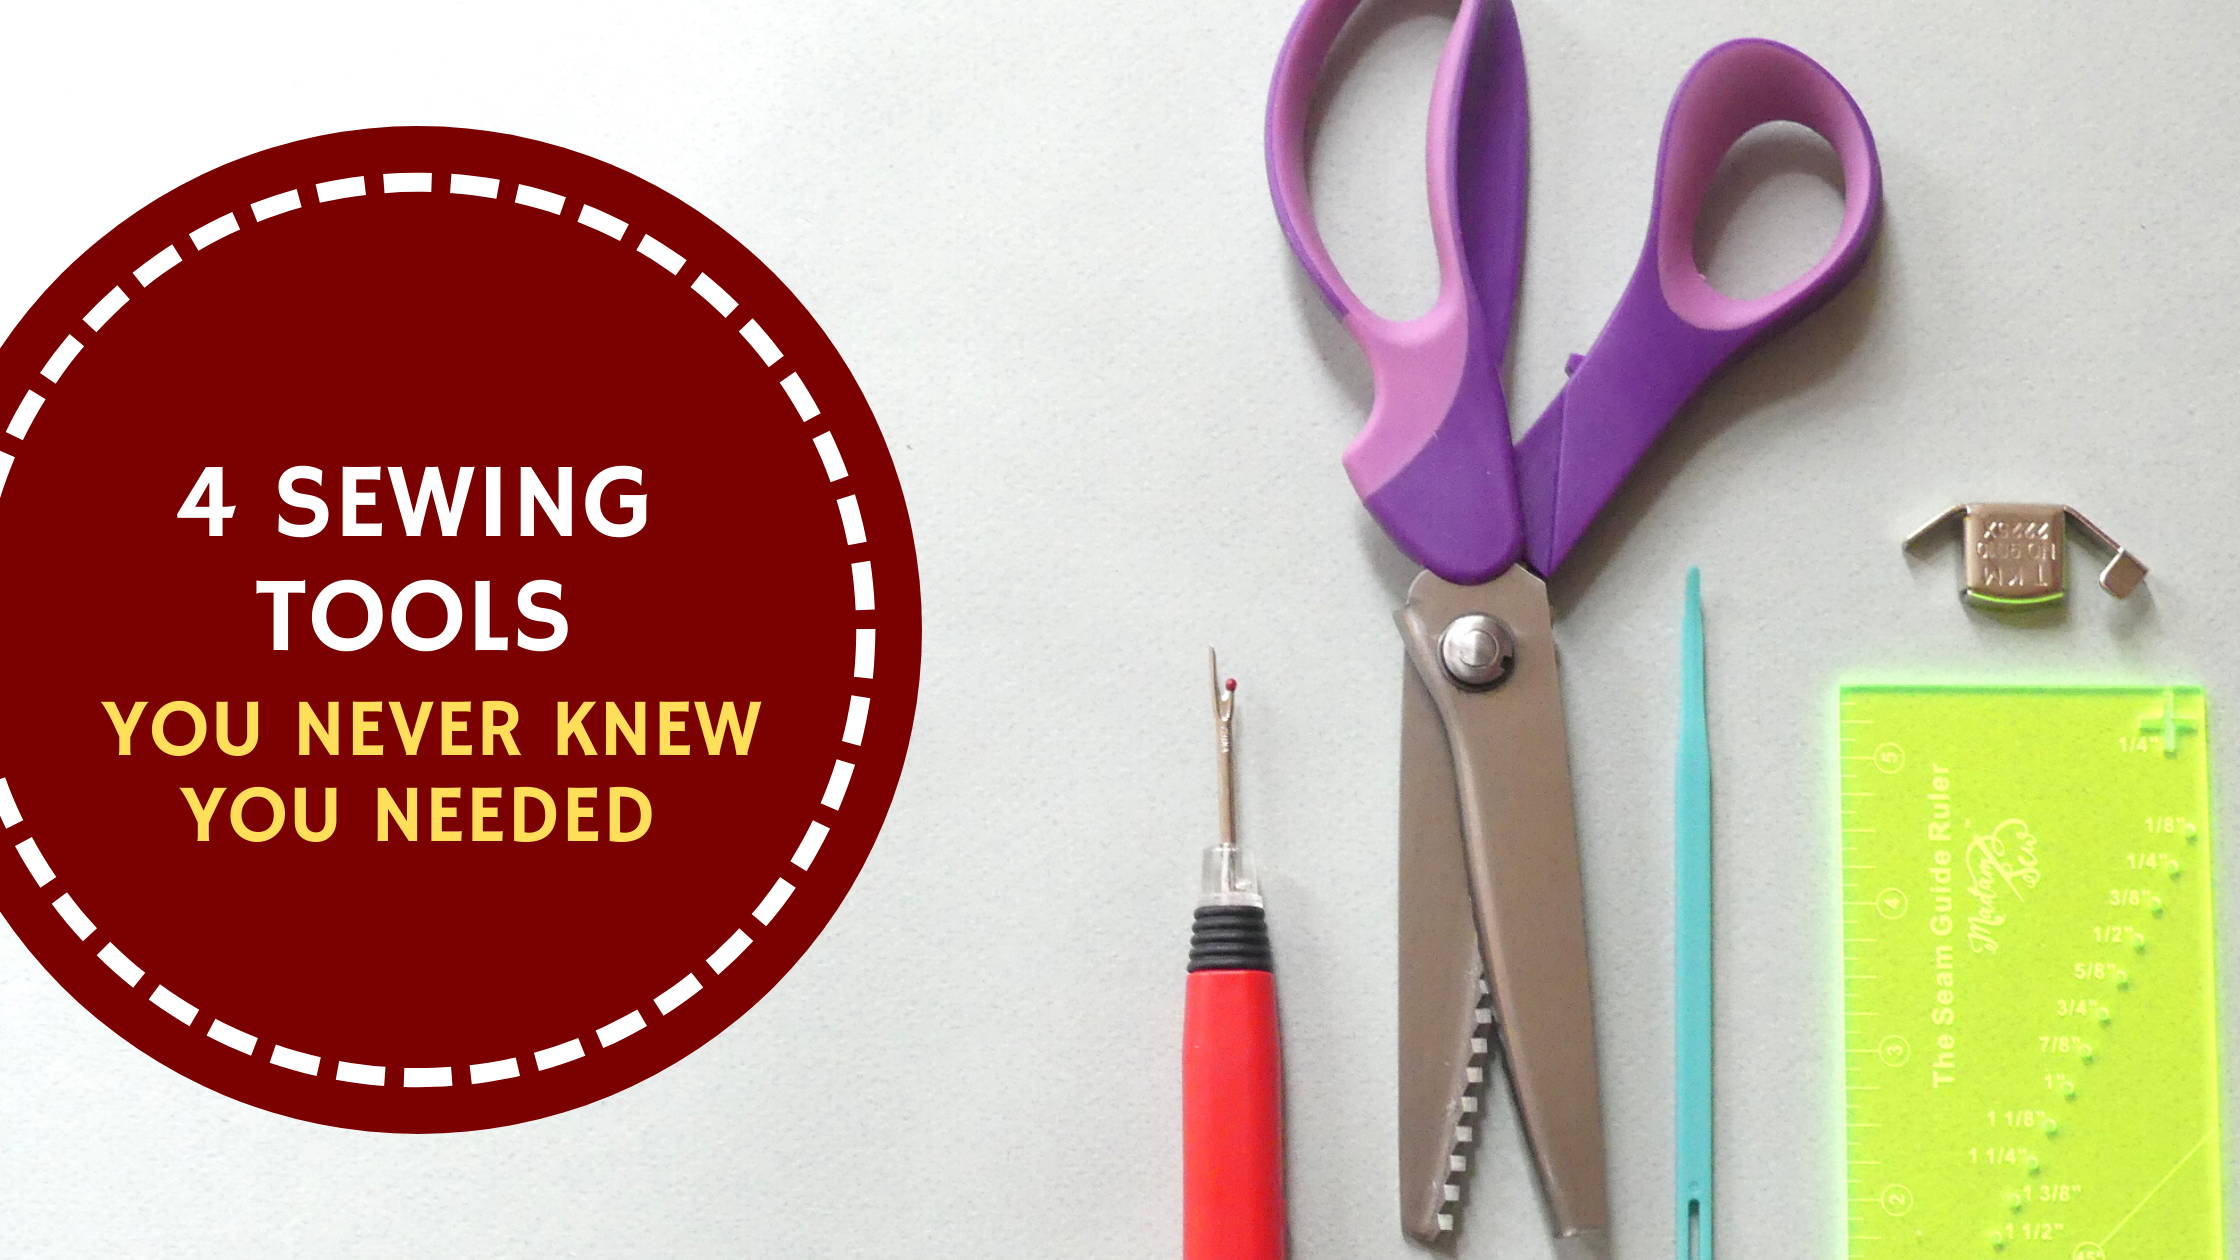 I got 4 new sewing tools and gadgets! Let's see what we think. 